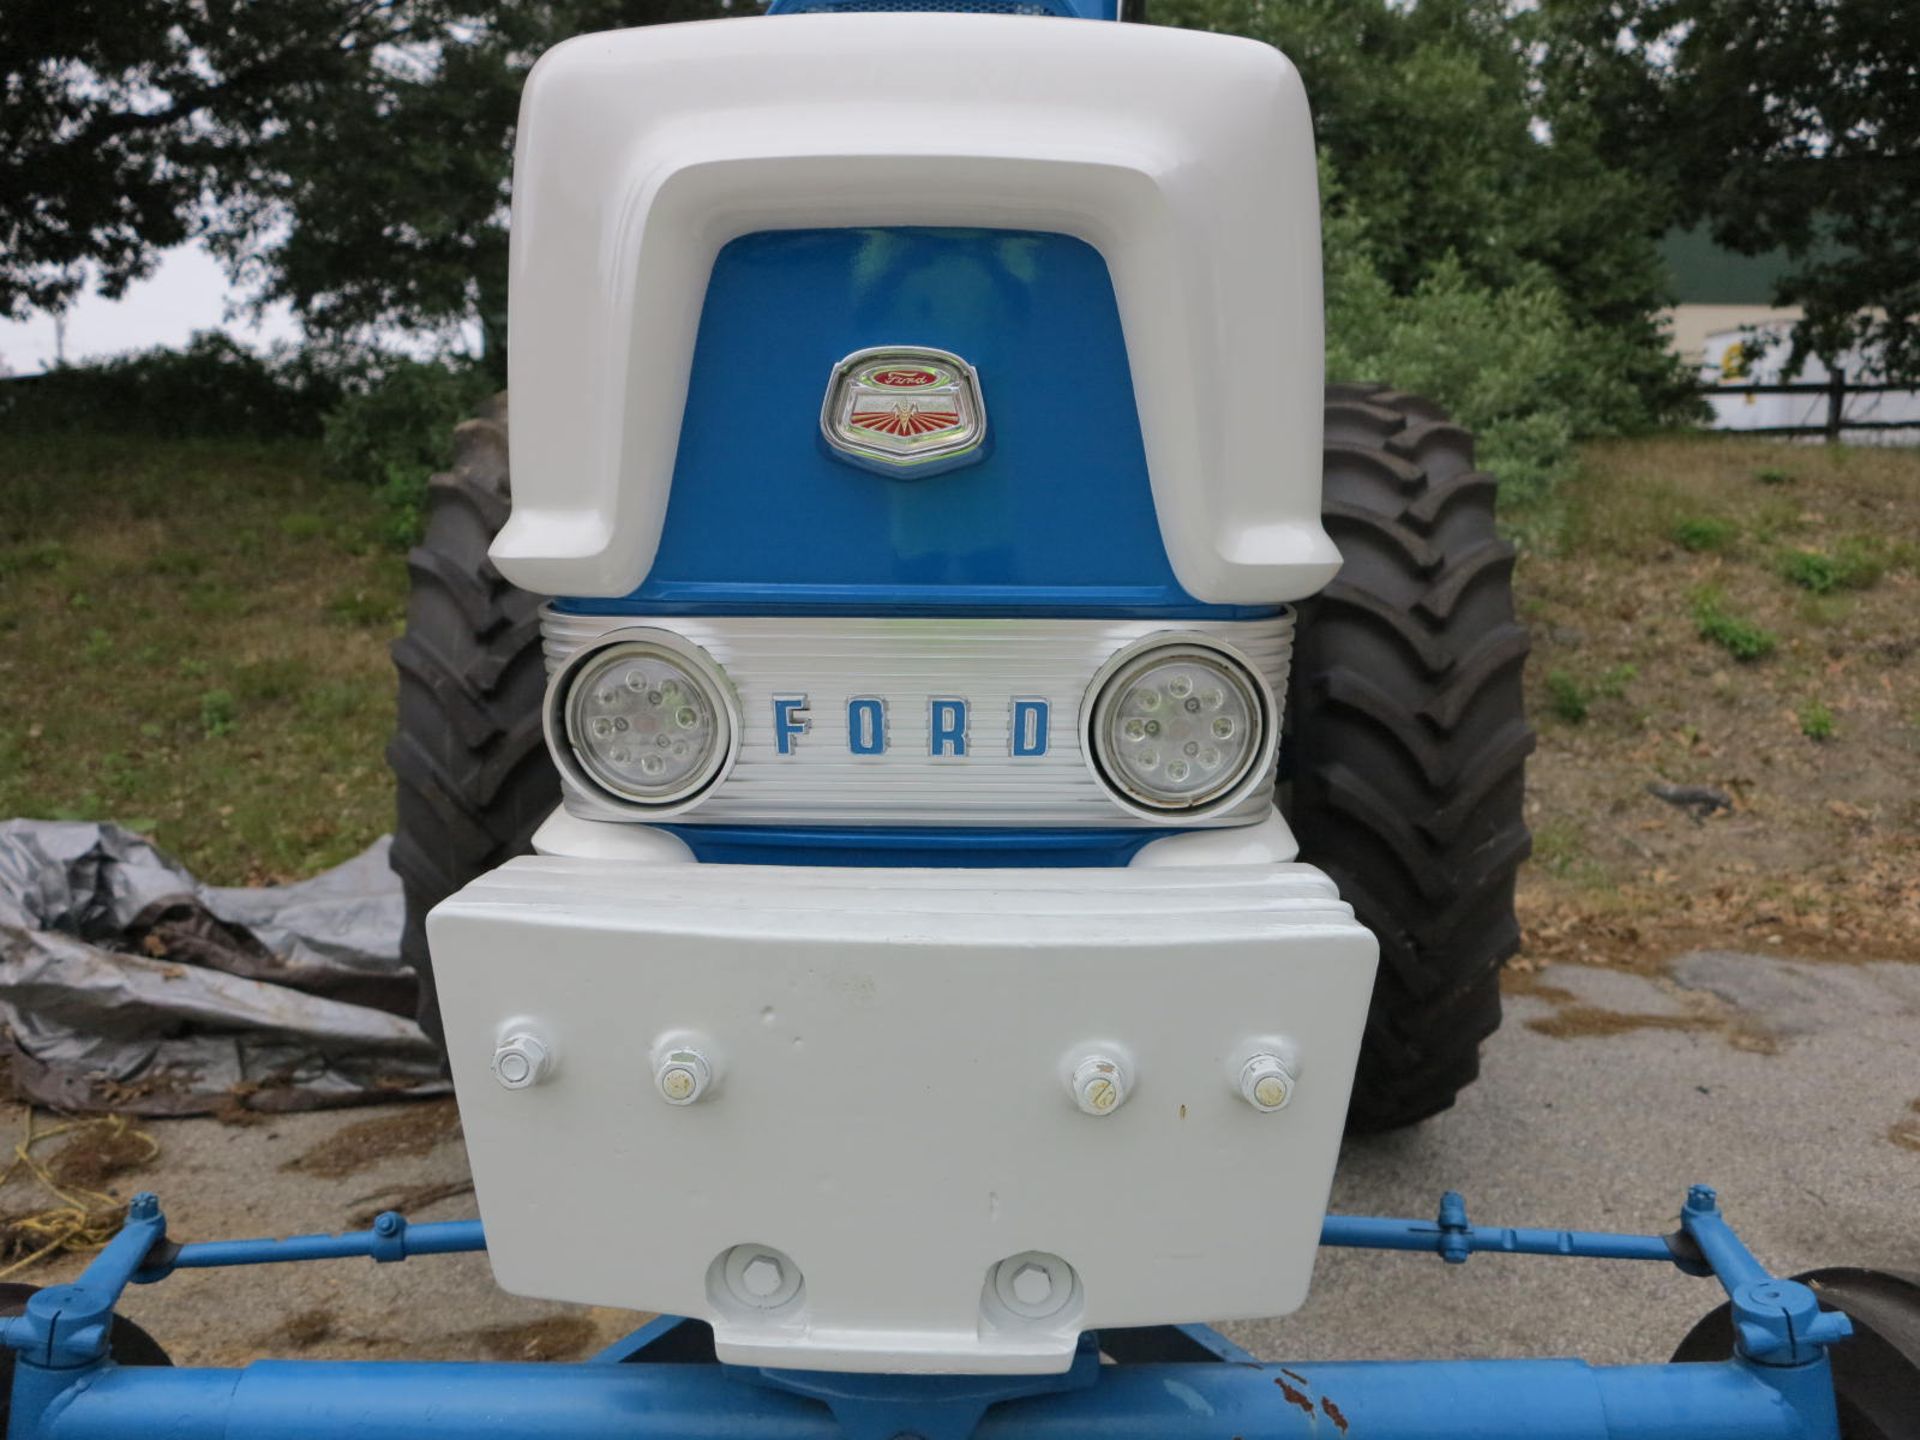 1960 Ford Diesel 6000 Tractor Frame Off Restoration Ford Diesel Engine New Duramax 18.4-38 Rear - Image 24 of 48